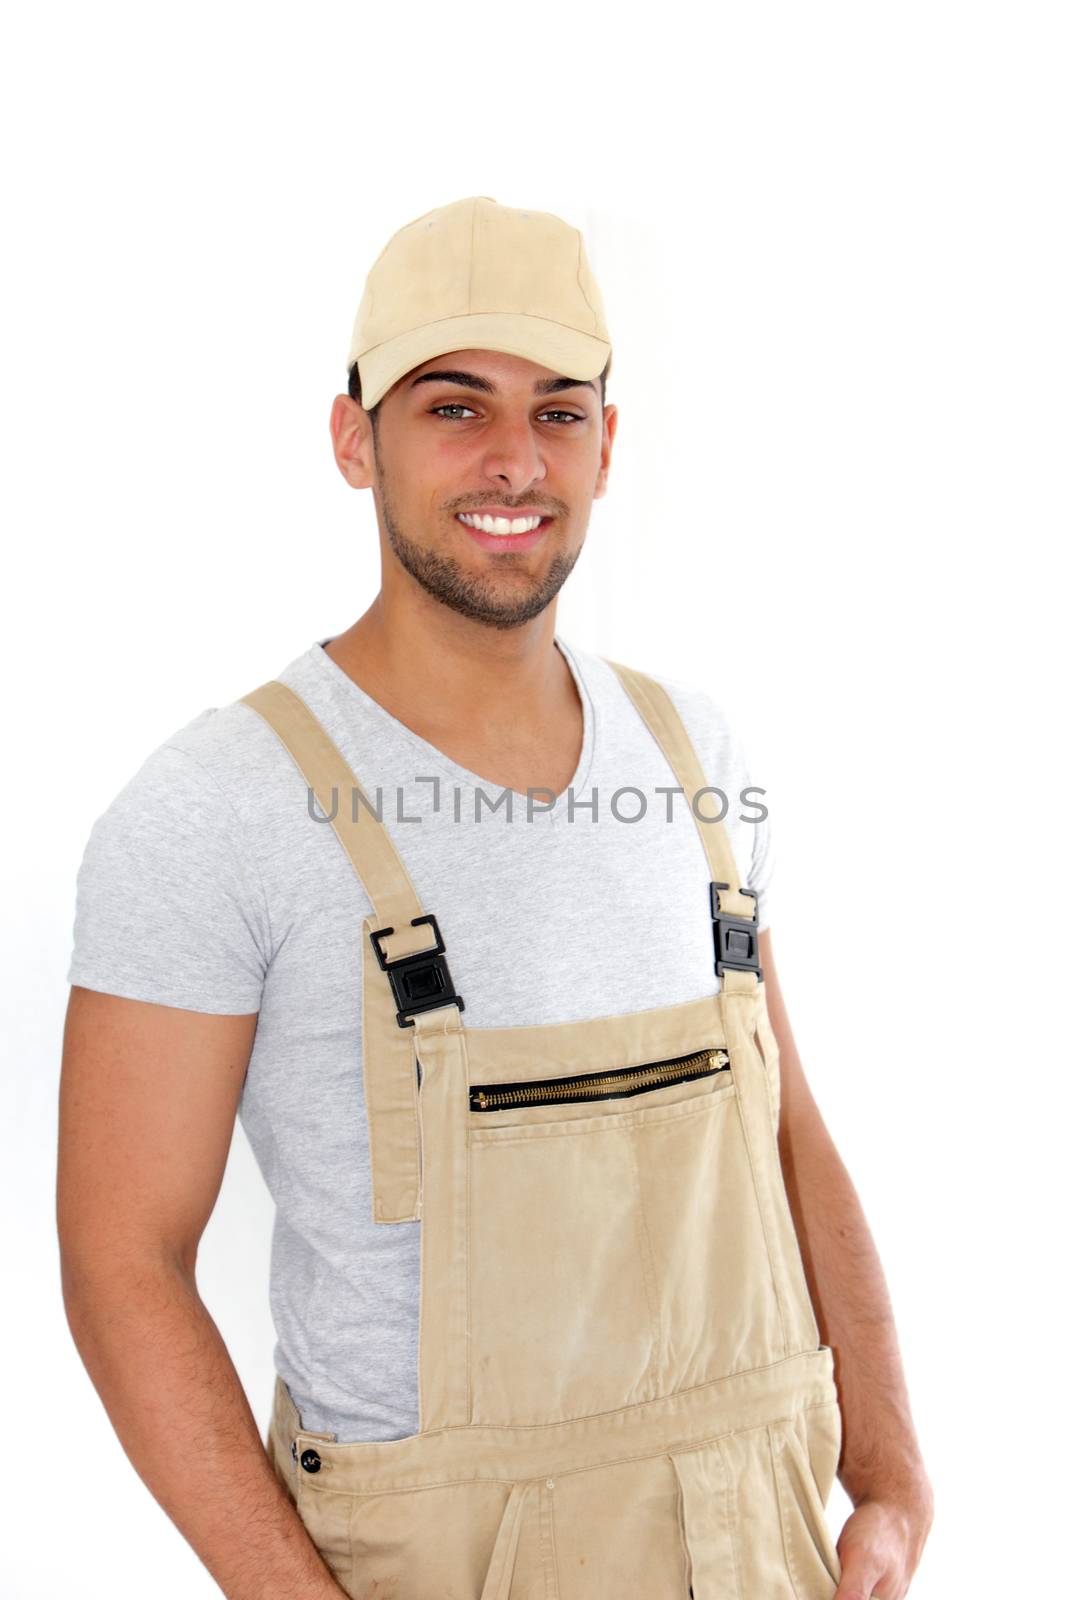 Handsome man in cap and dungarees standing smiling confidently at the camera, isolated on white